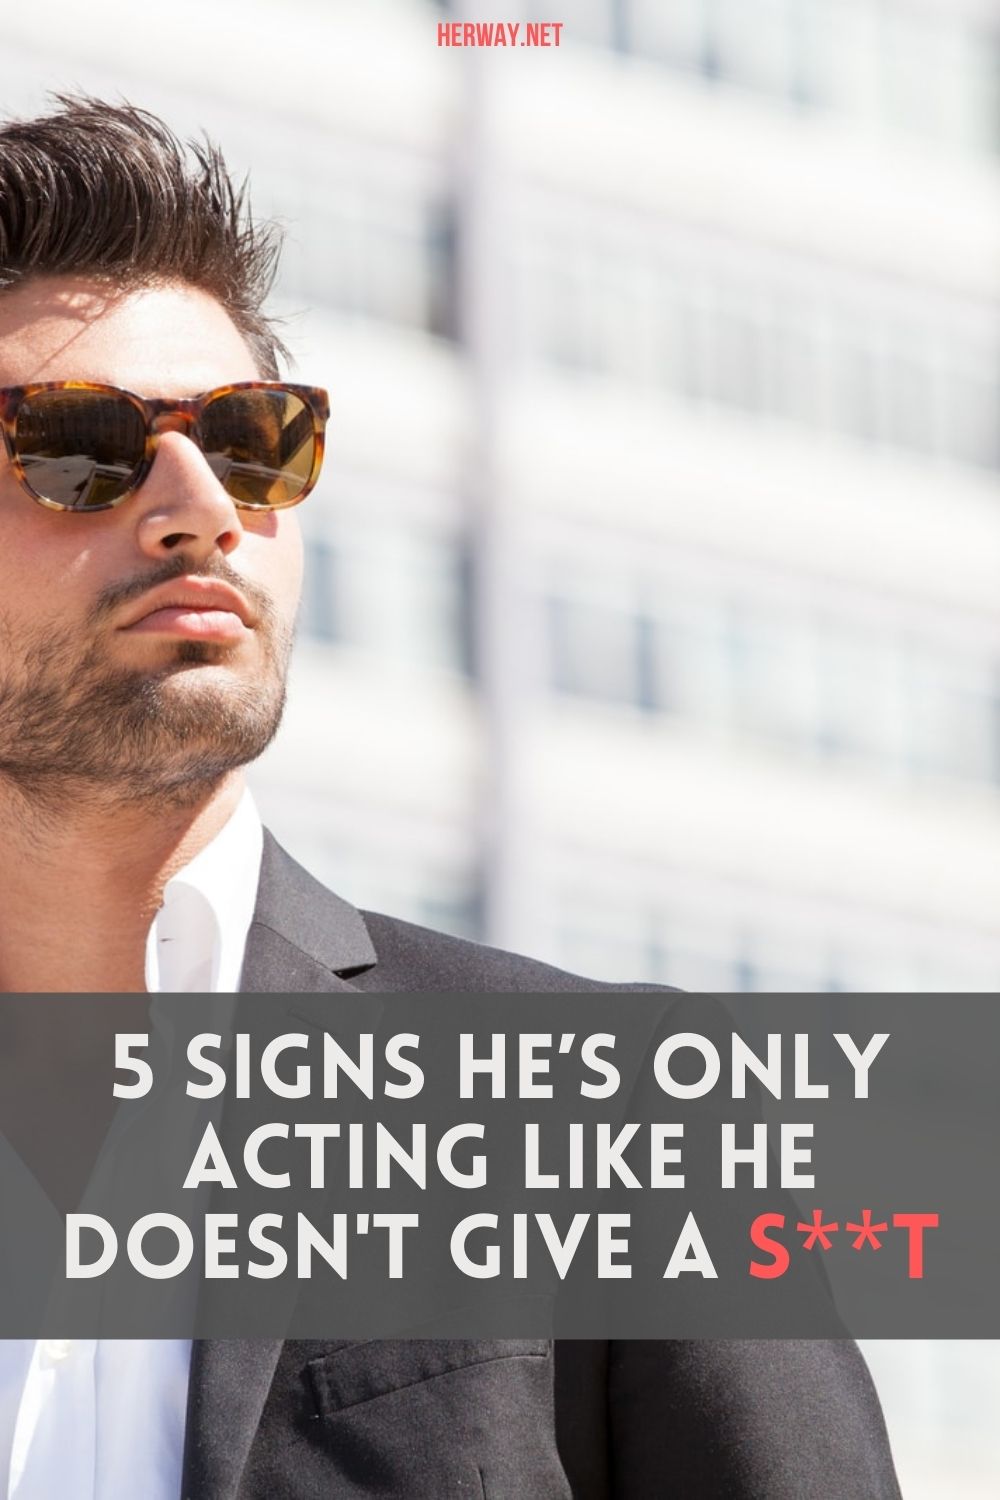 5 Signs He’s Only Acting Like He Doesn't Give A S**t